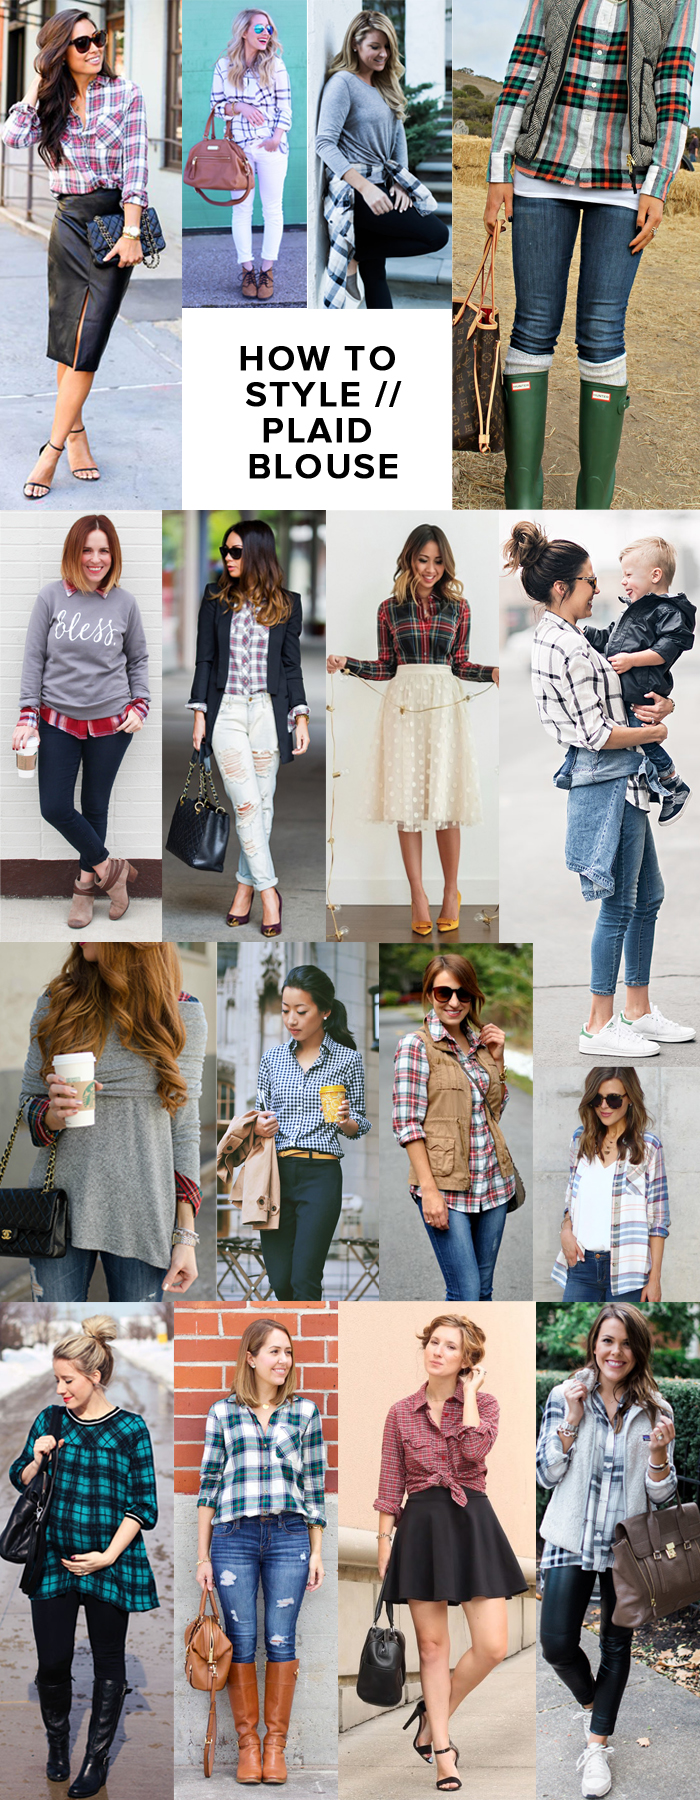 How to Style a Plaid Blouse, Outfit Ideas and Inspiration, Plaid Top